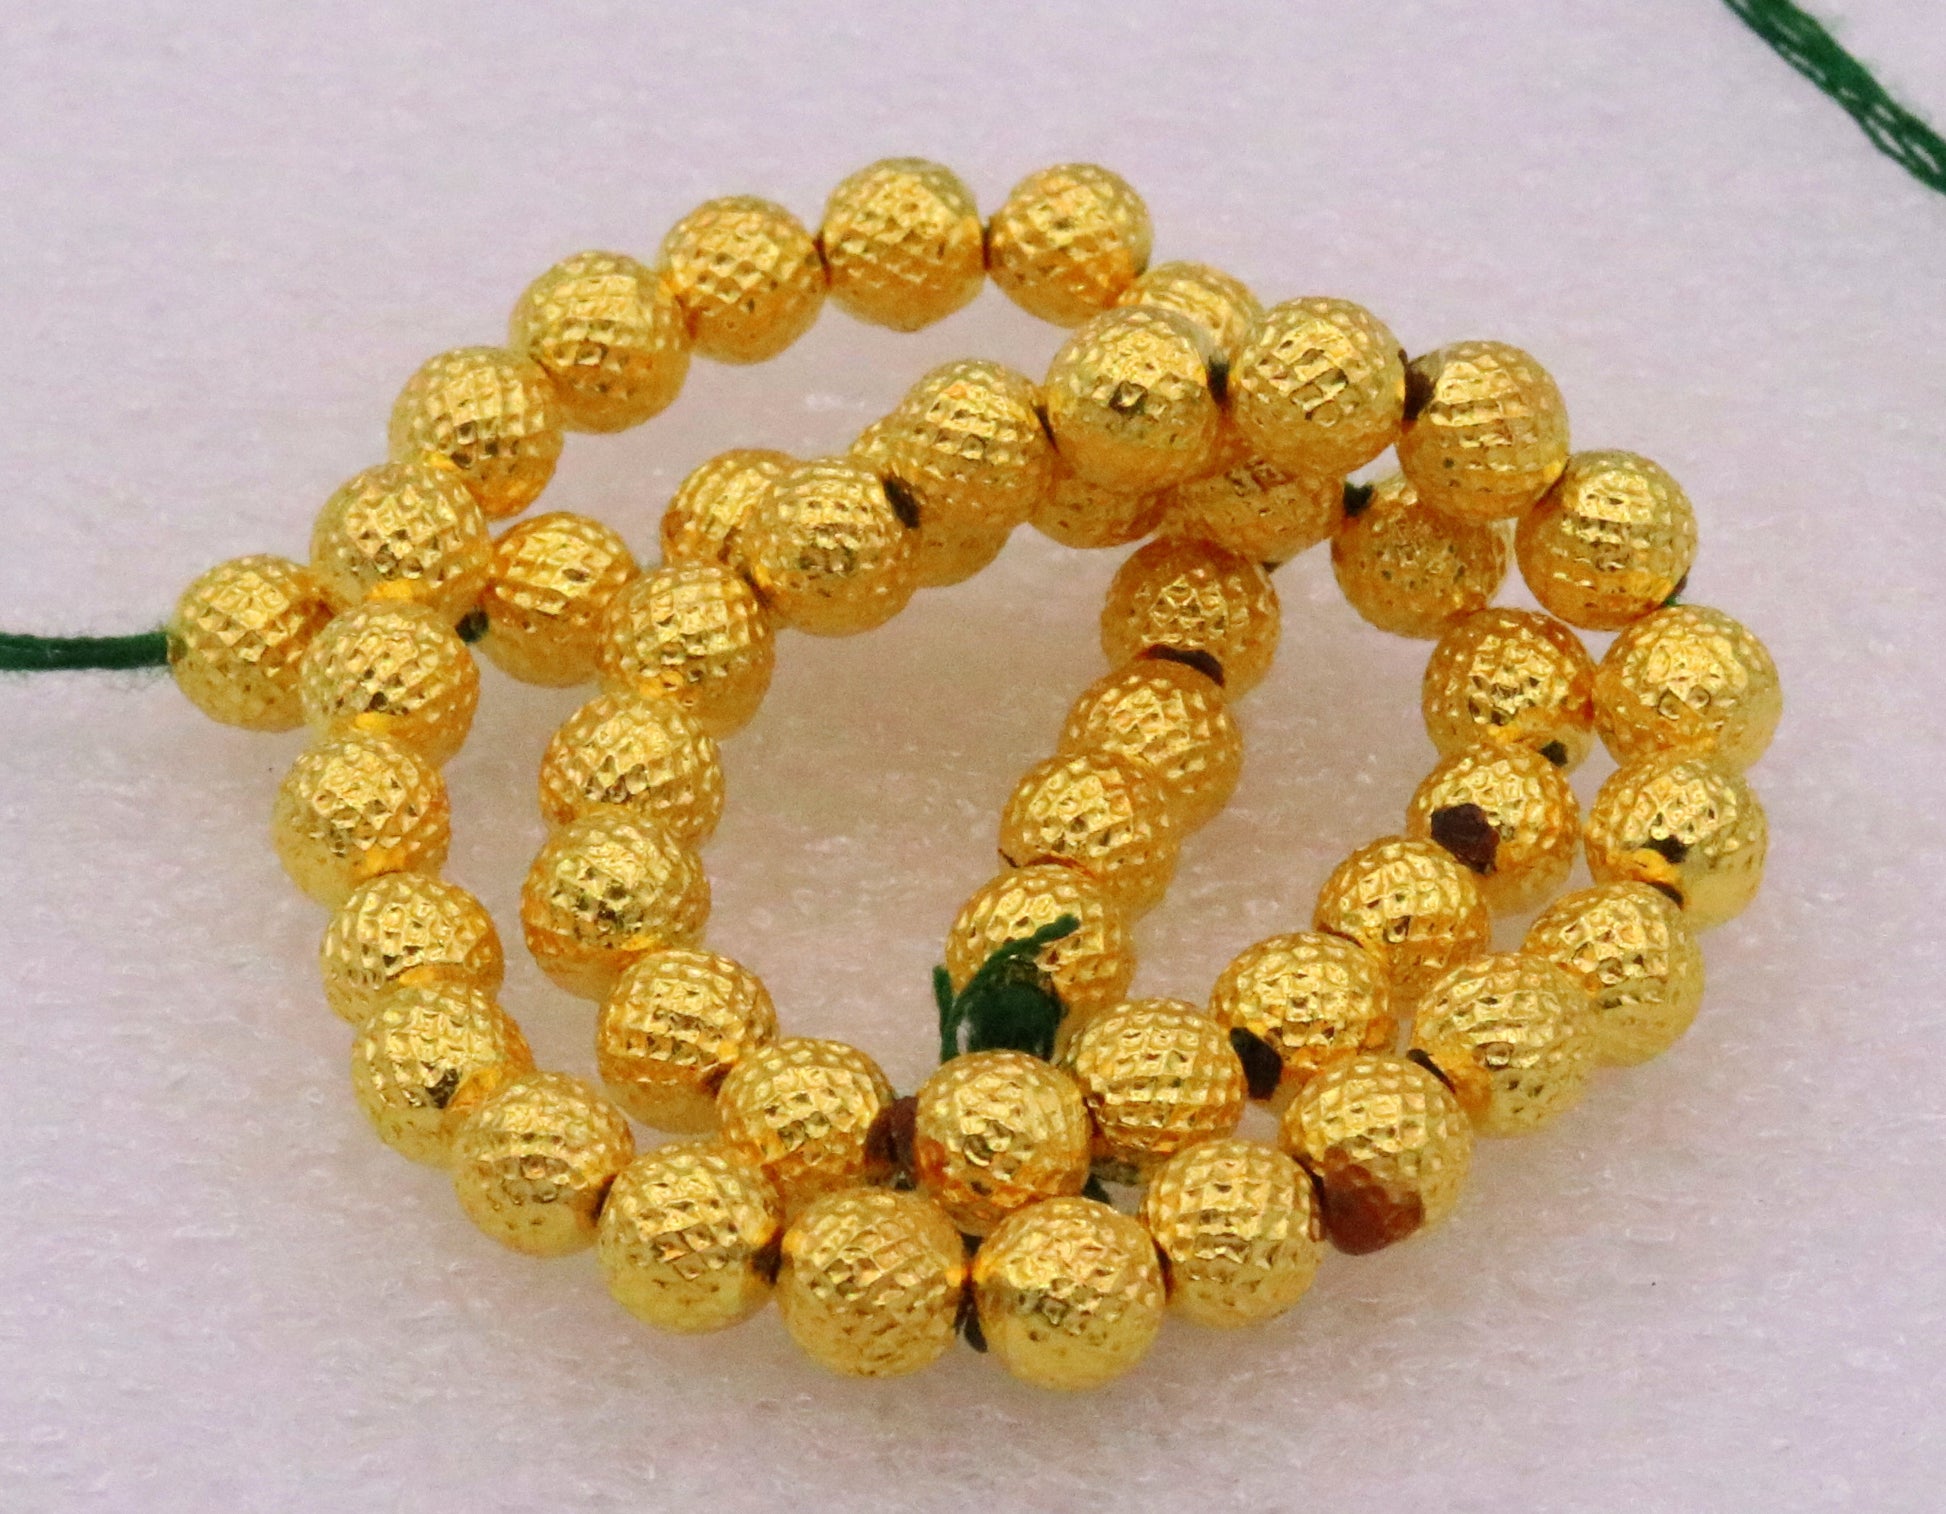 Lot 20 pieces Vintage handmade 20kt yellow gold beads ball for excellent jewelry making idea tribal rajasthani beads - TRIBAL ORNAMENTS